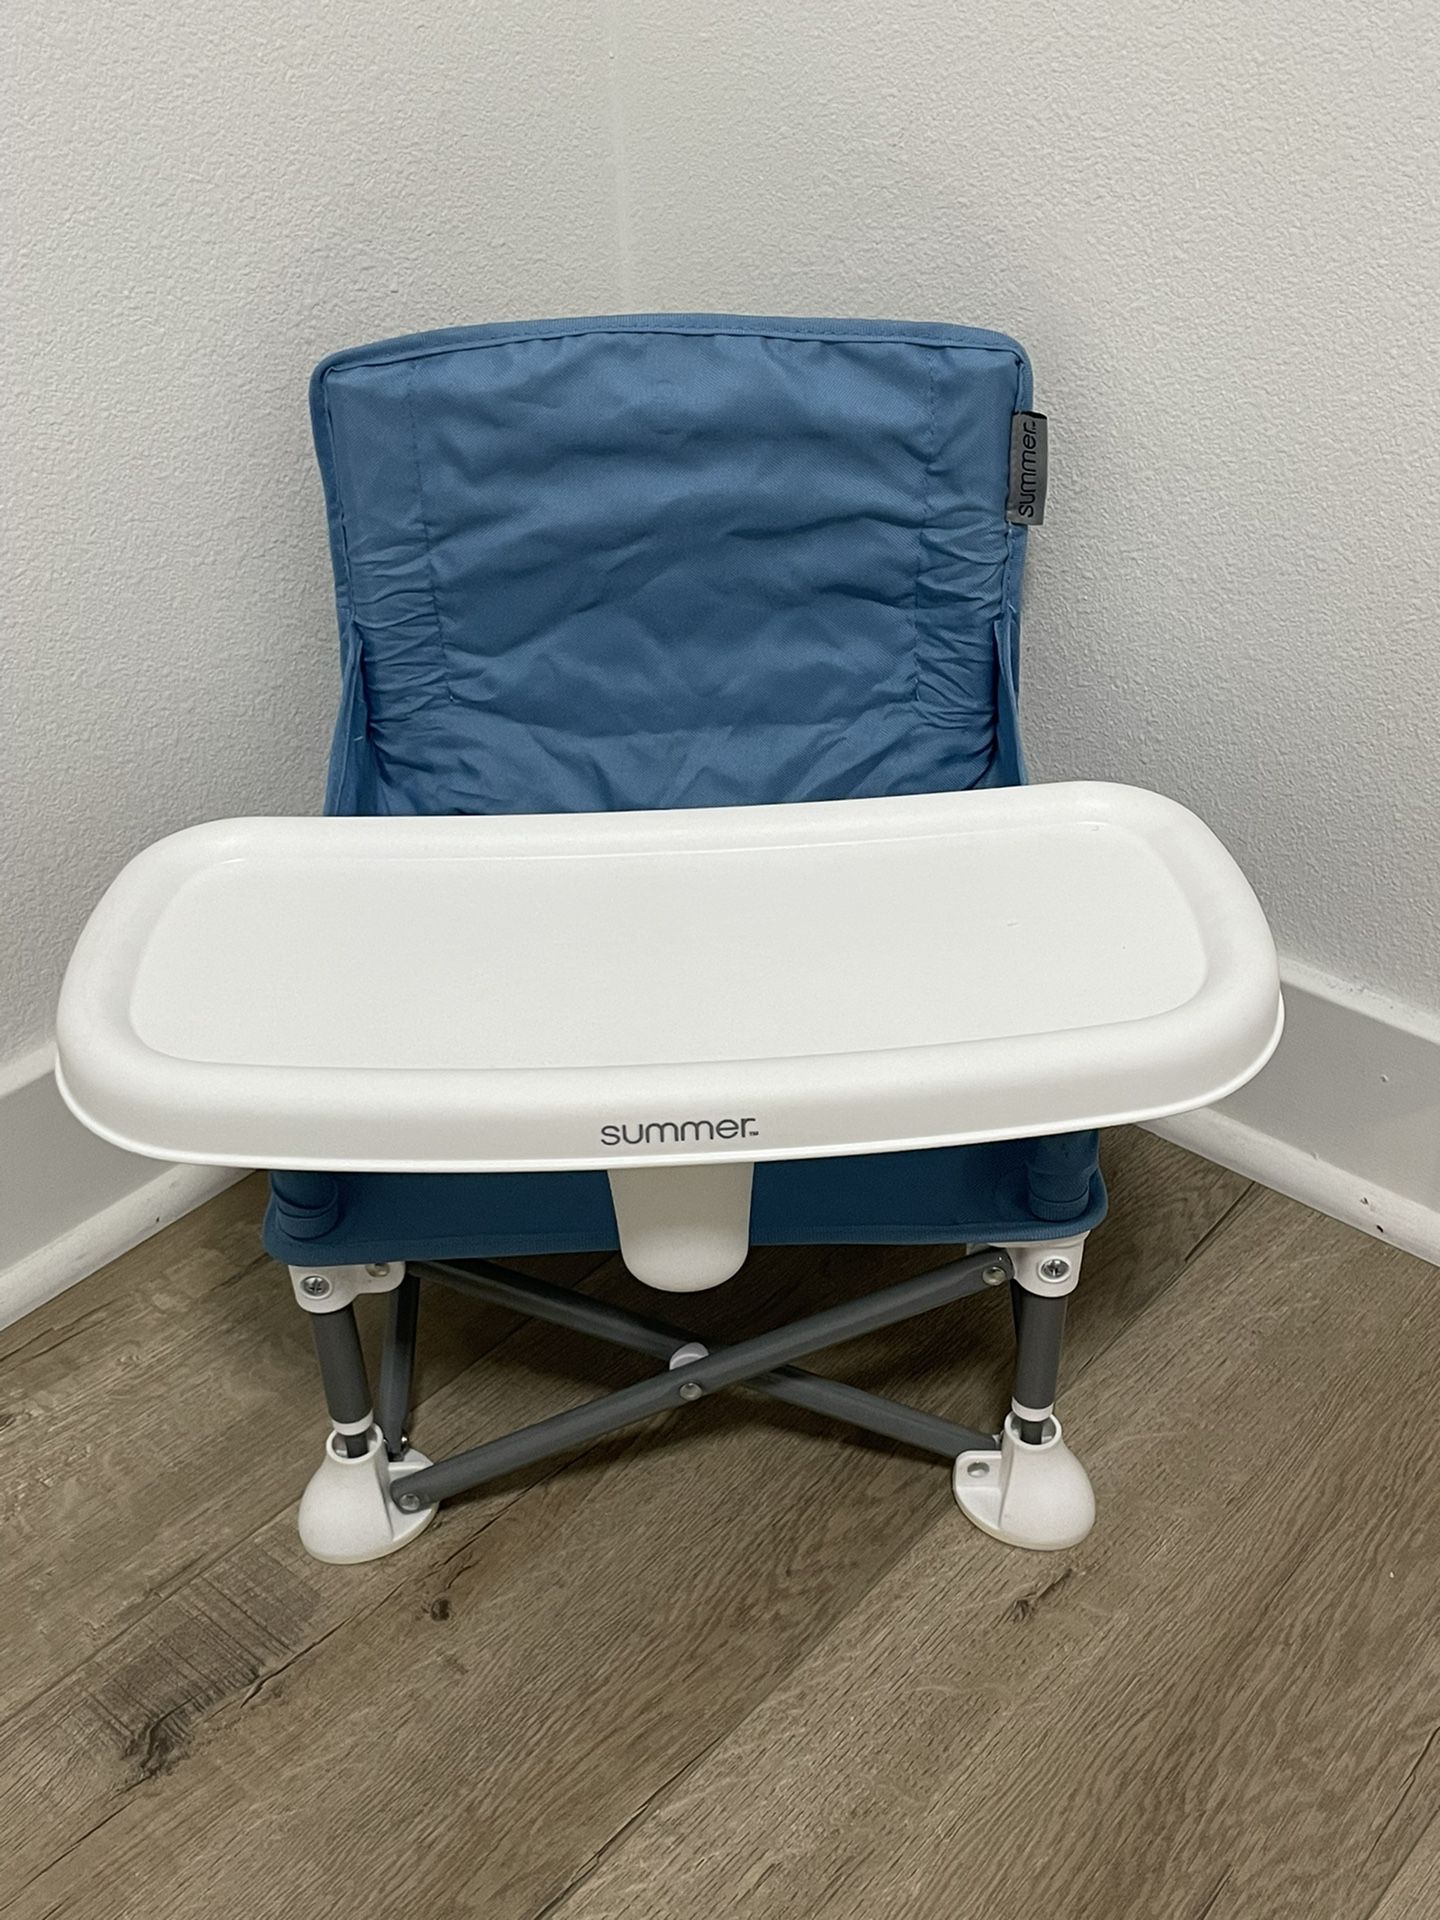 Baby Seat Booster 